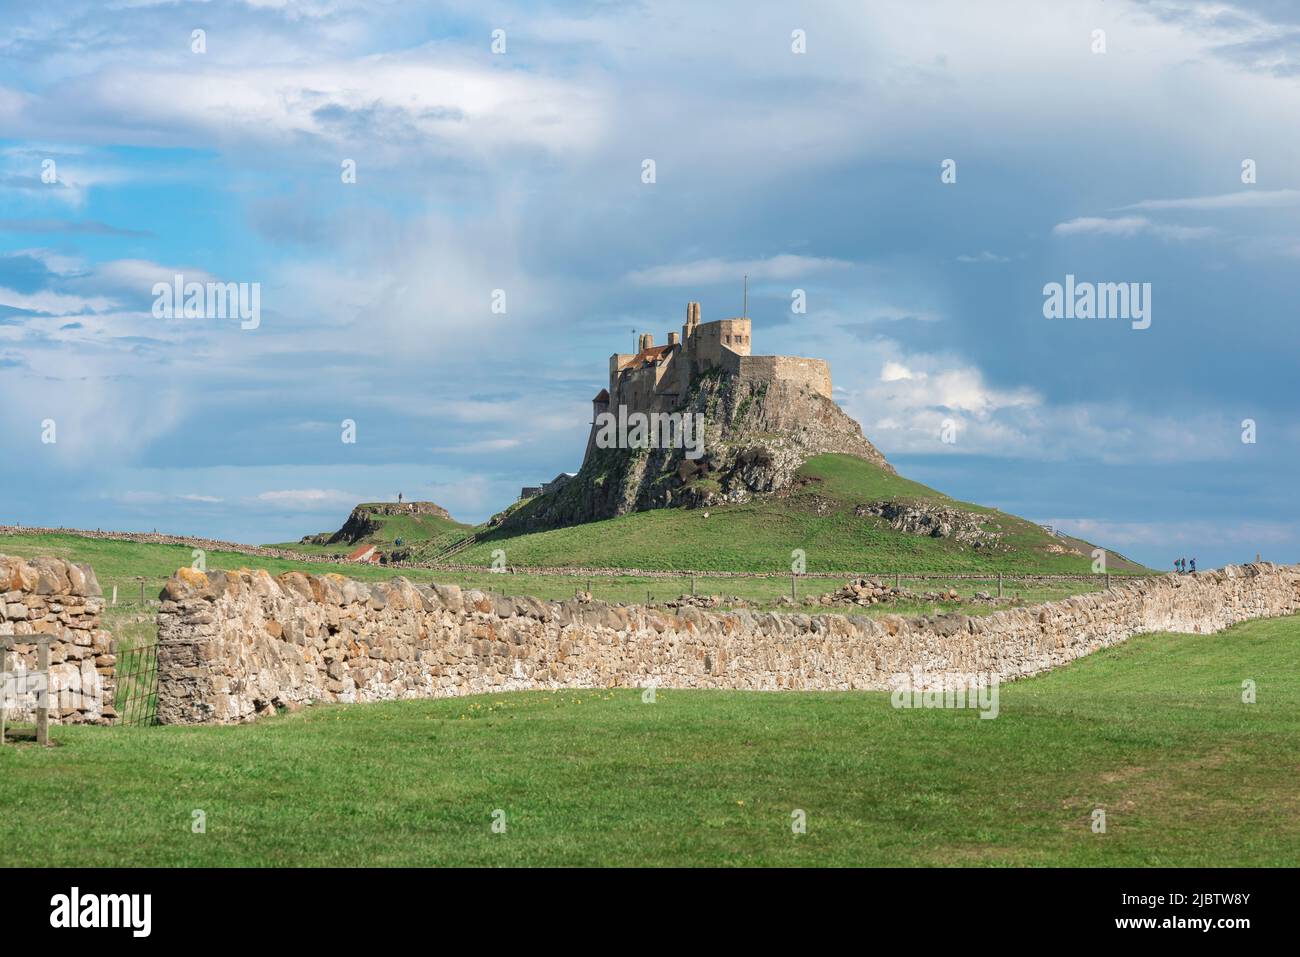 Northumberland castle, view in late spring of Lindisfarne Castle, a 16th century castle sited on Holy Island (Lindisfarne), Northumberland coast, UK Stock Photo